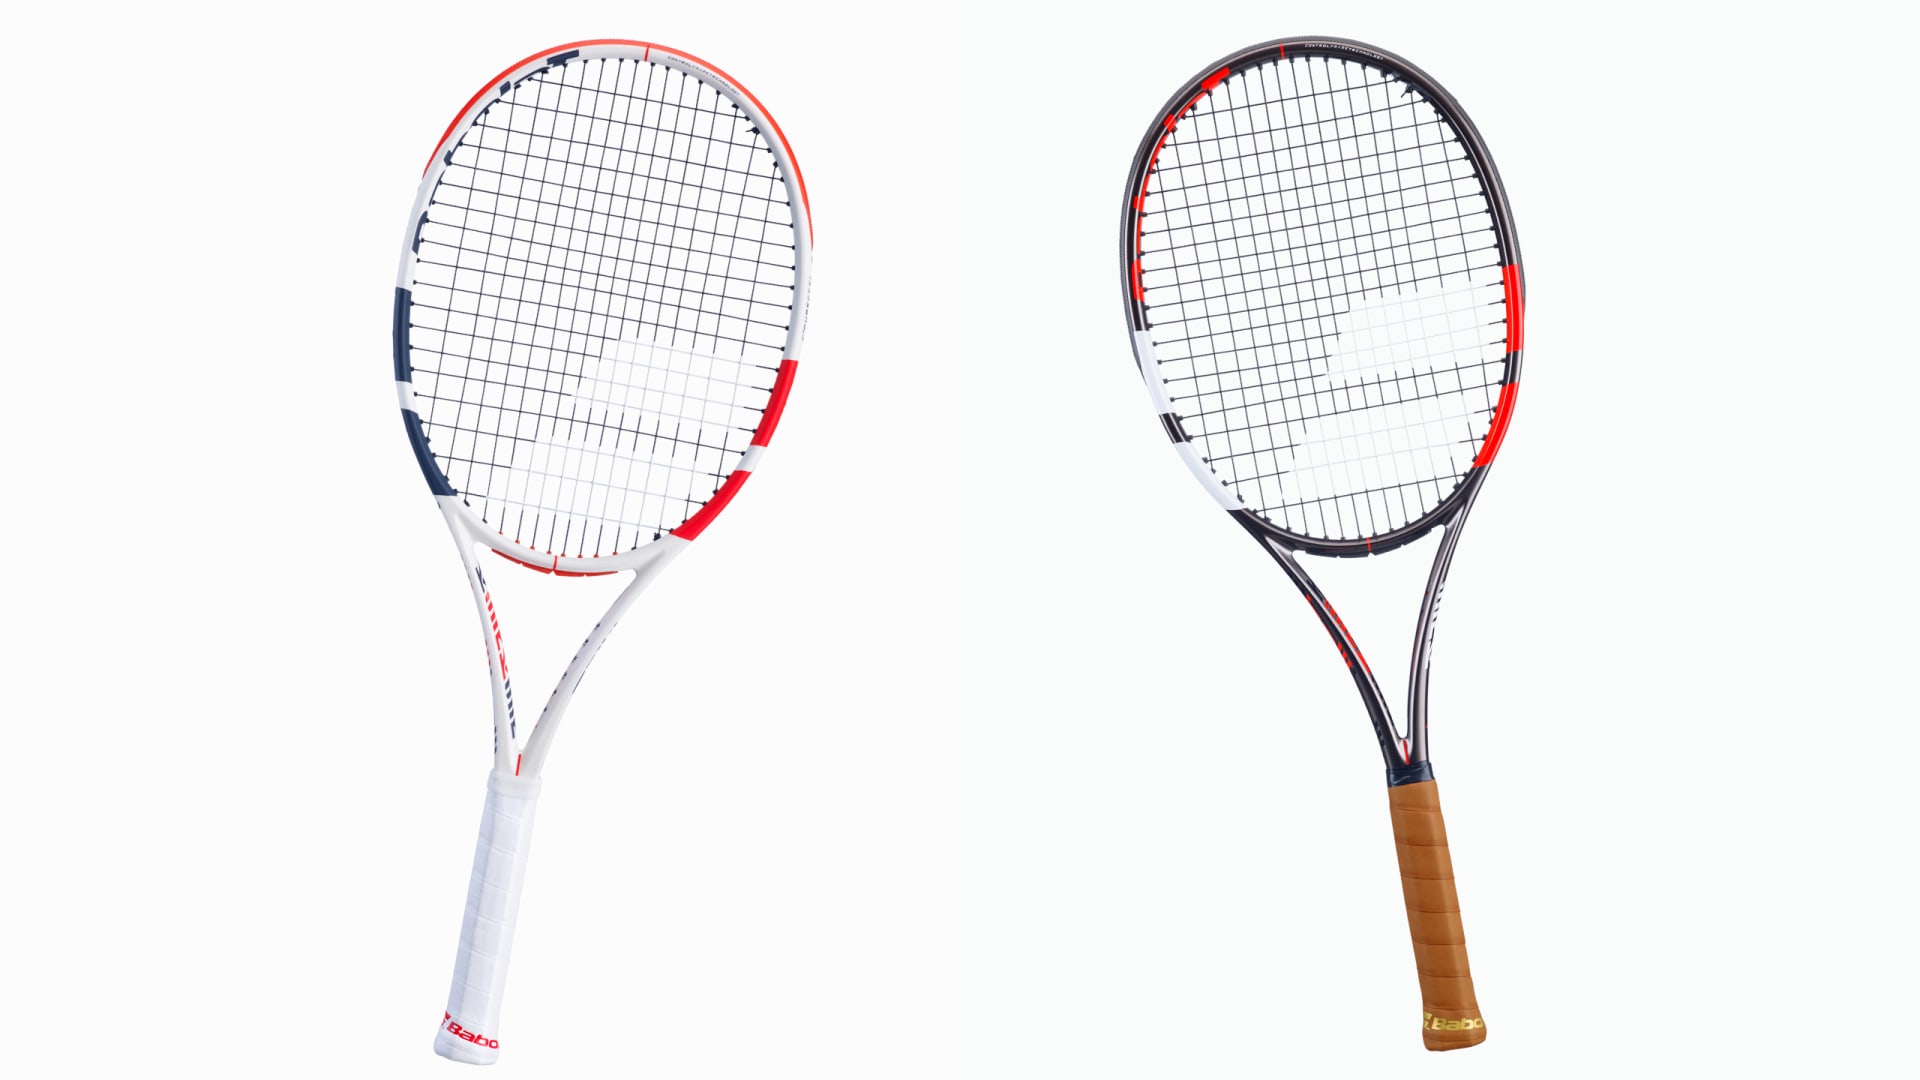 2022 Gear Guide: Babolat Racquets—Pure Strike 103 and Pure